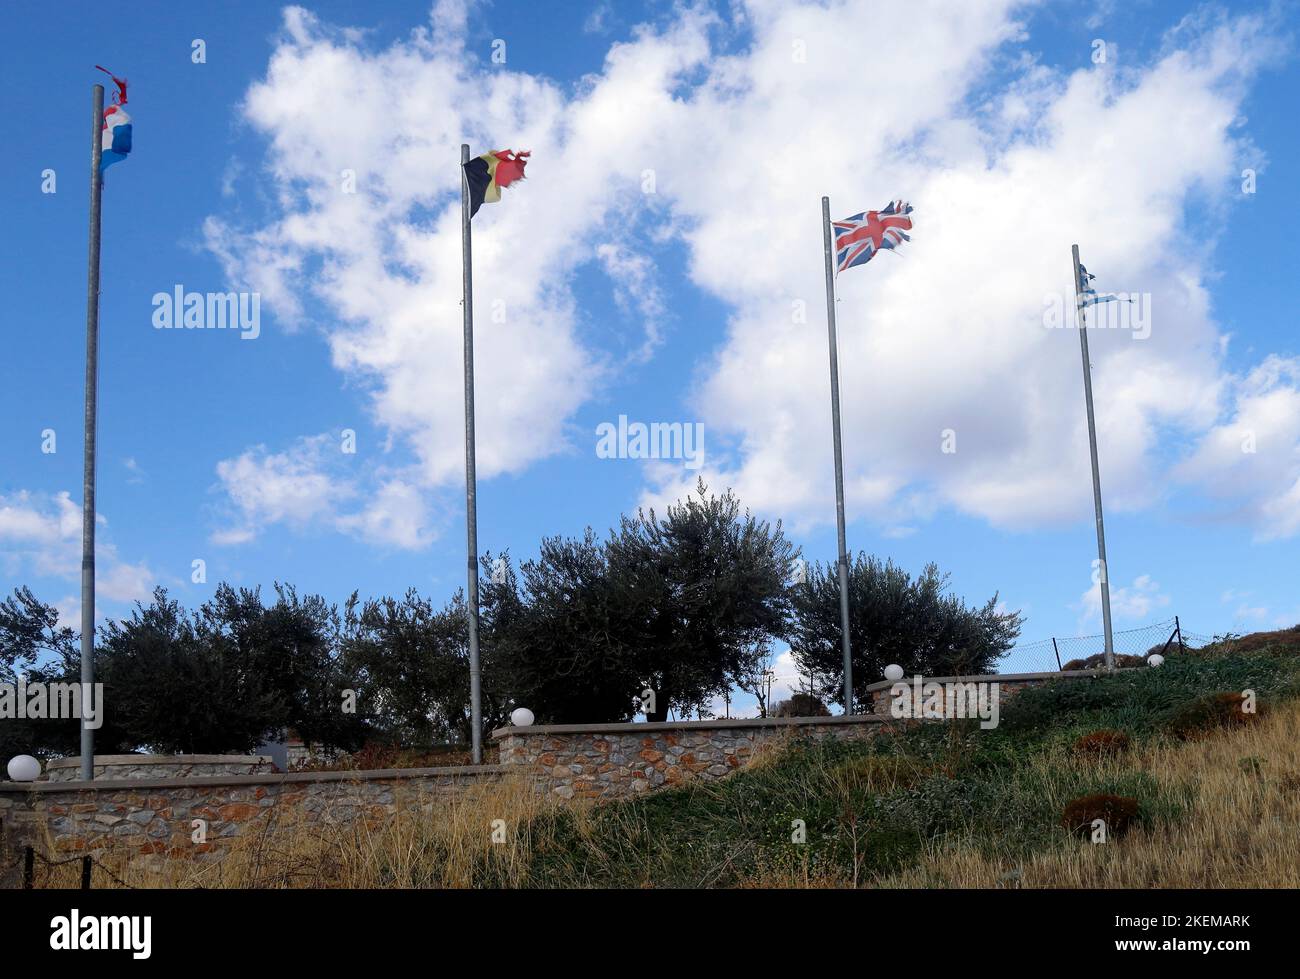 Tattered flags and flagpoles against a blue sky with scattered clouds. Stock Photo